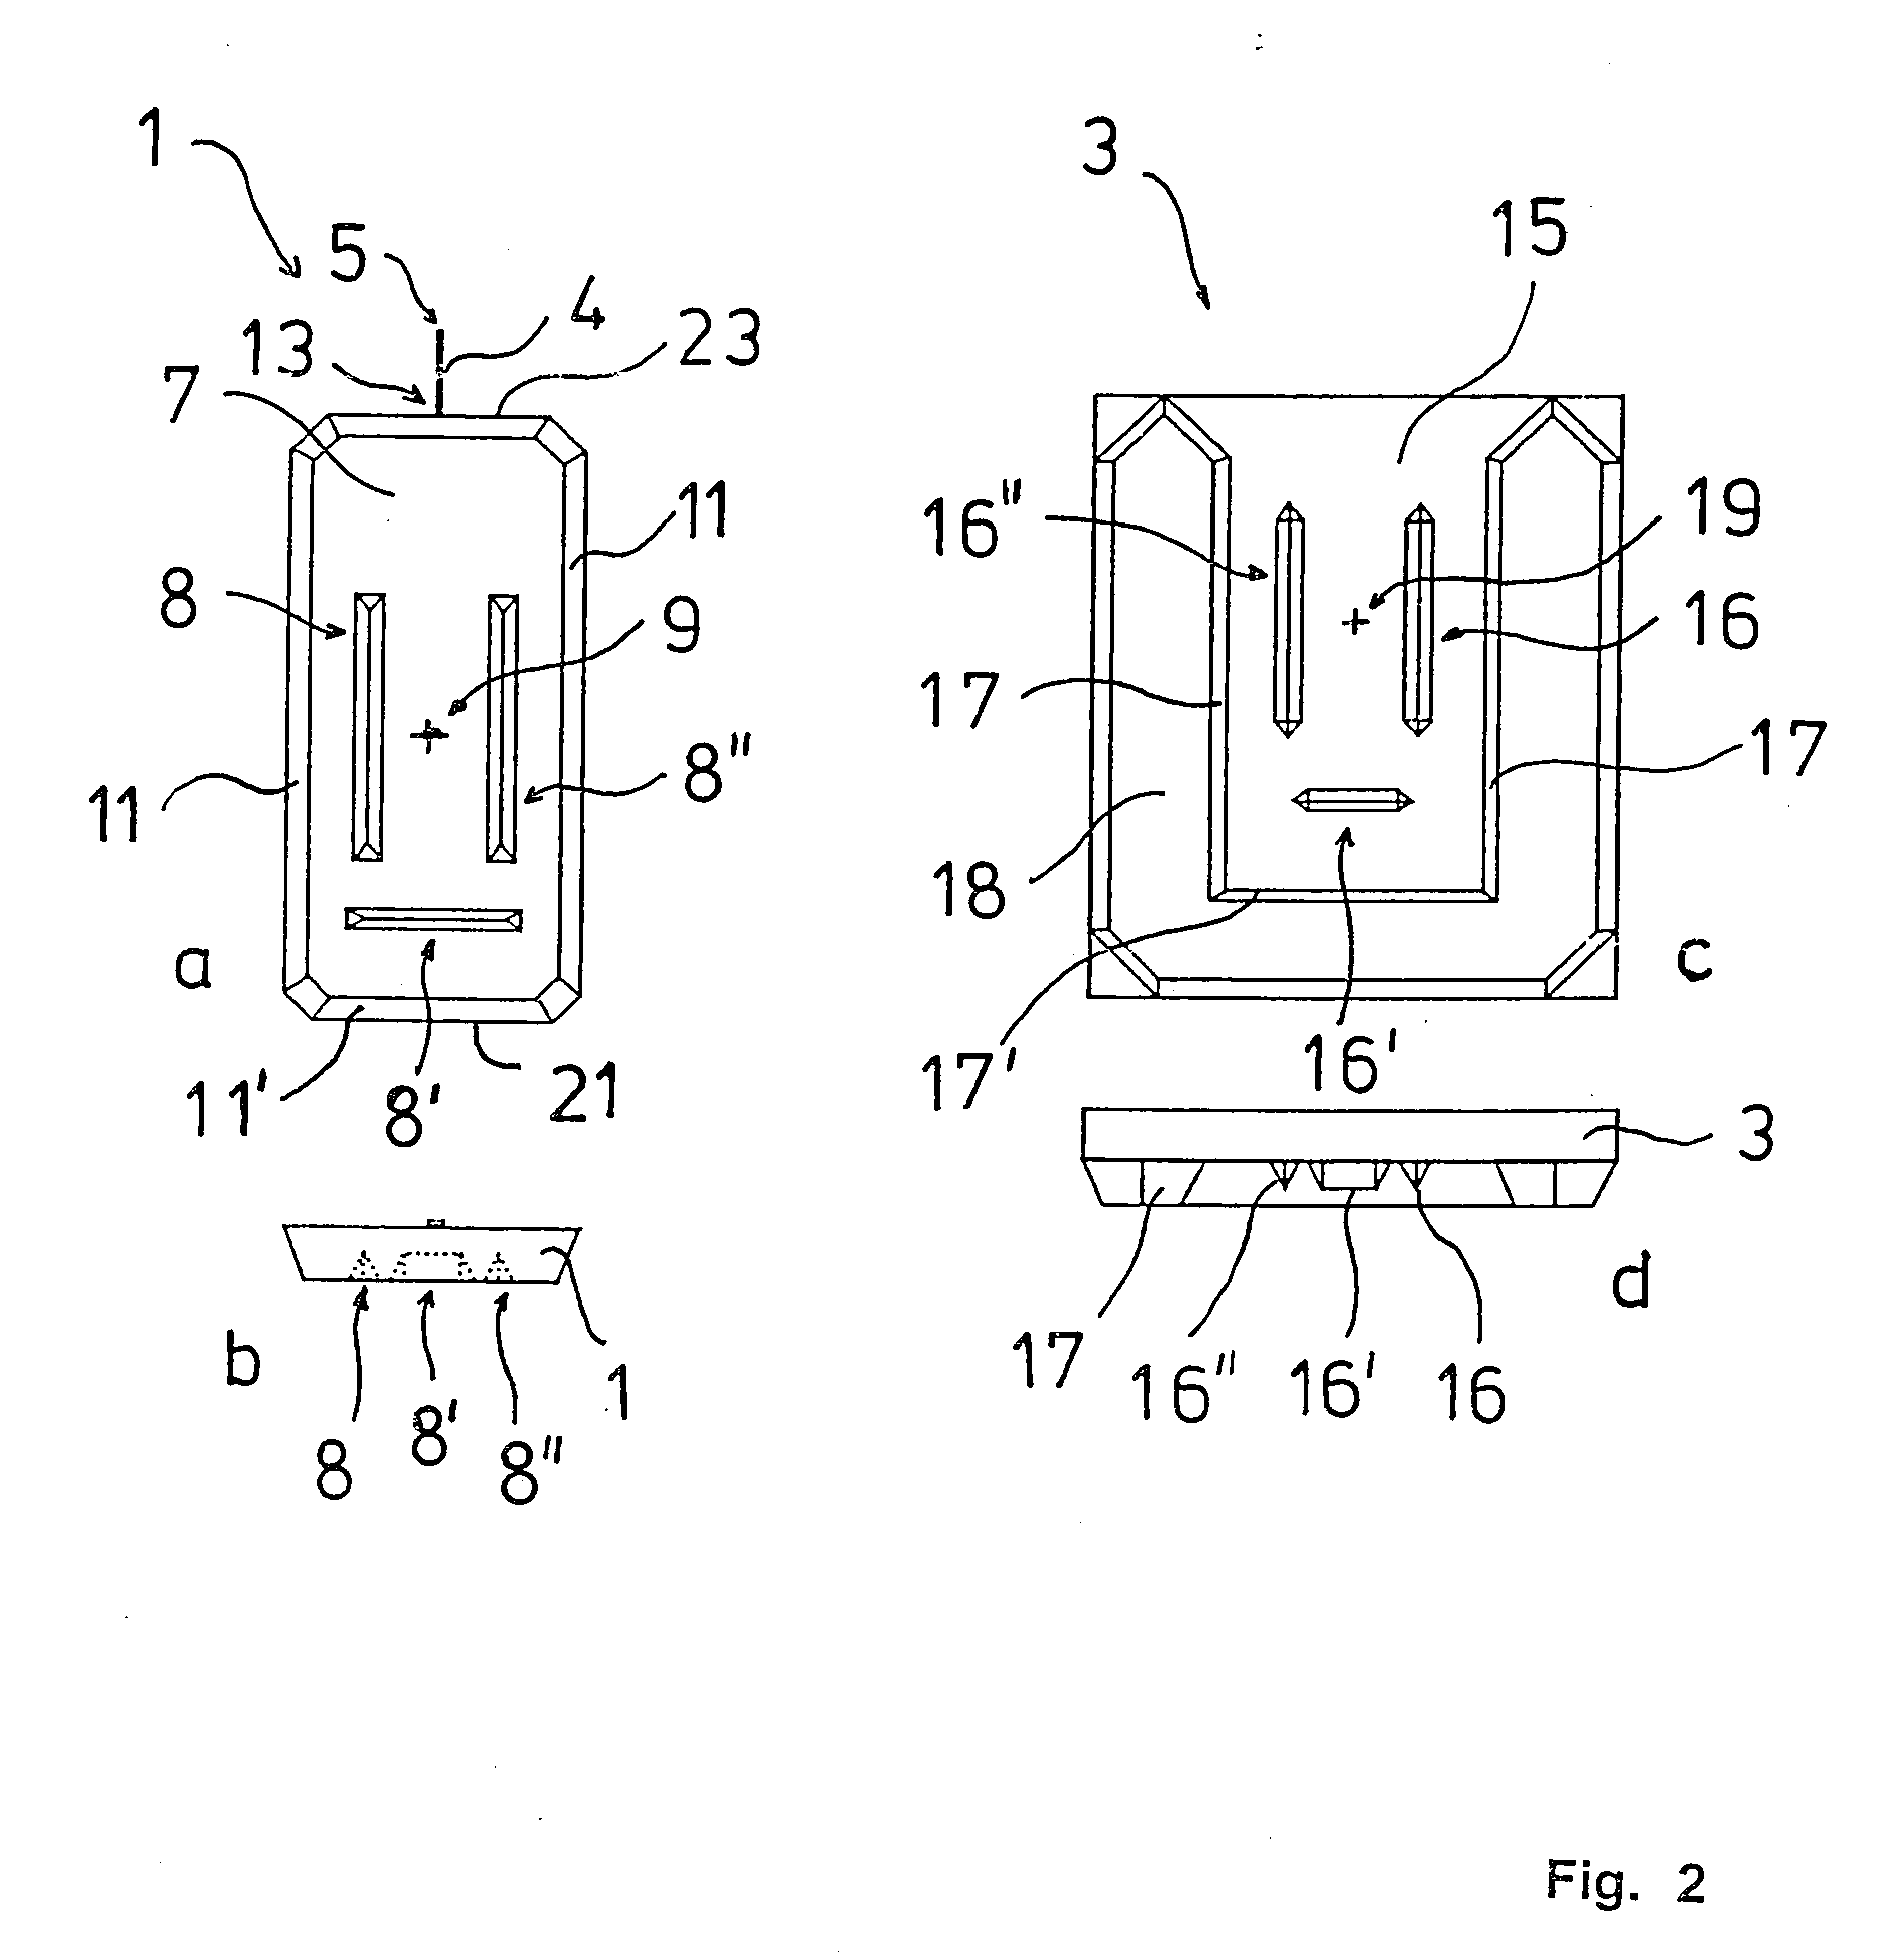 Self-aligning scanning probes for a scanning probe microscope